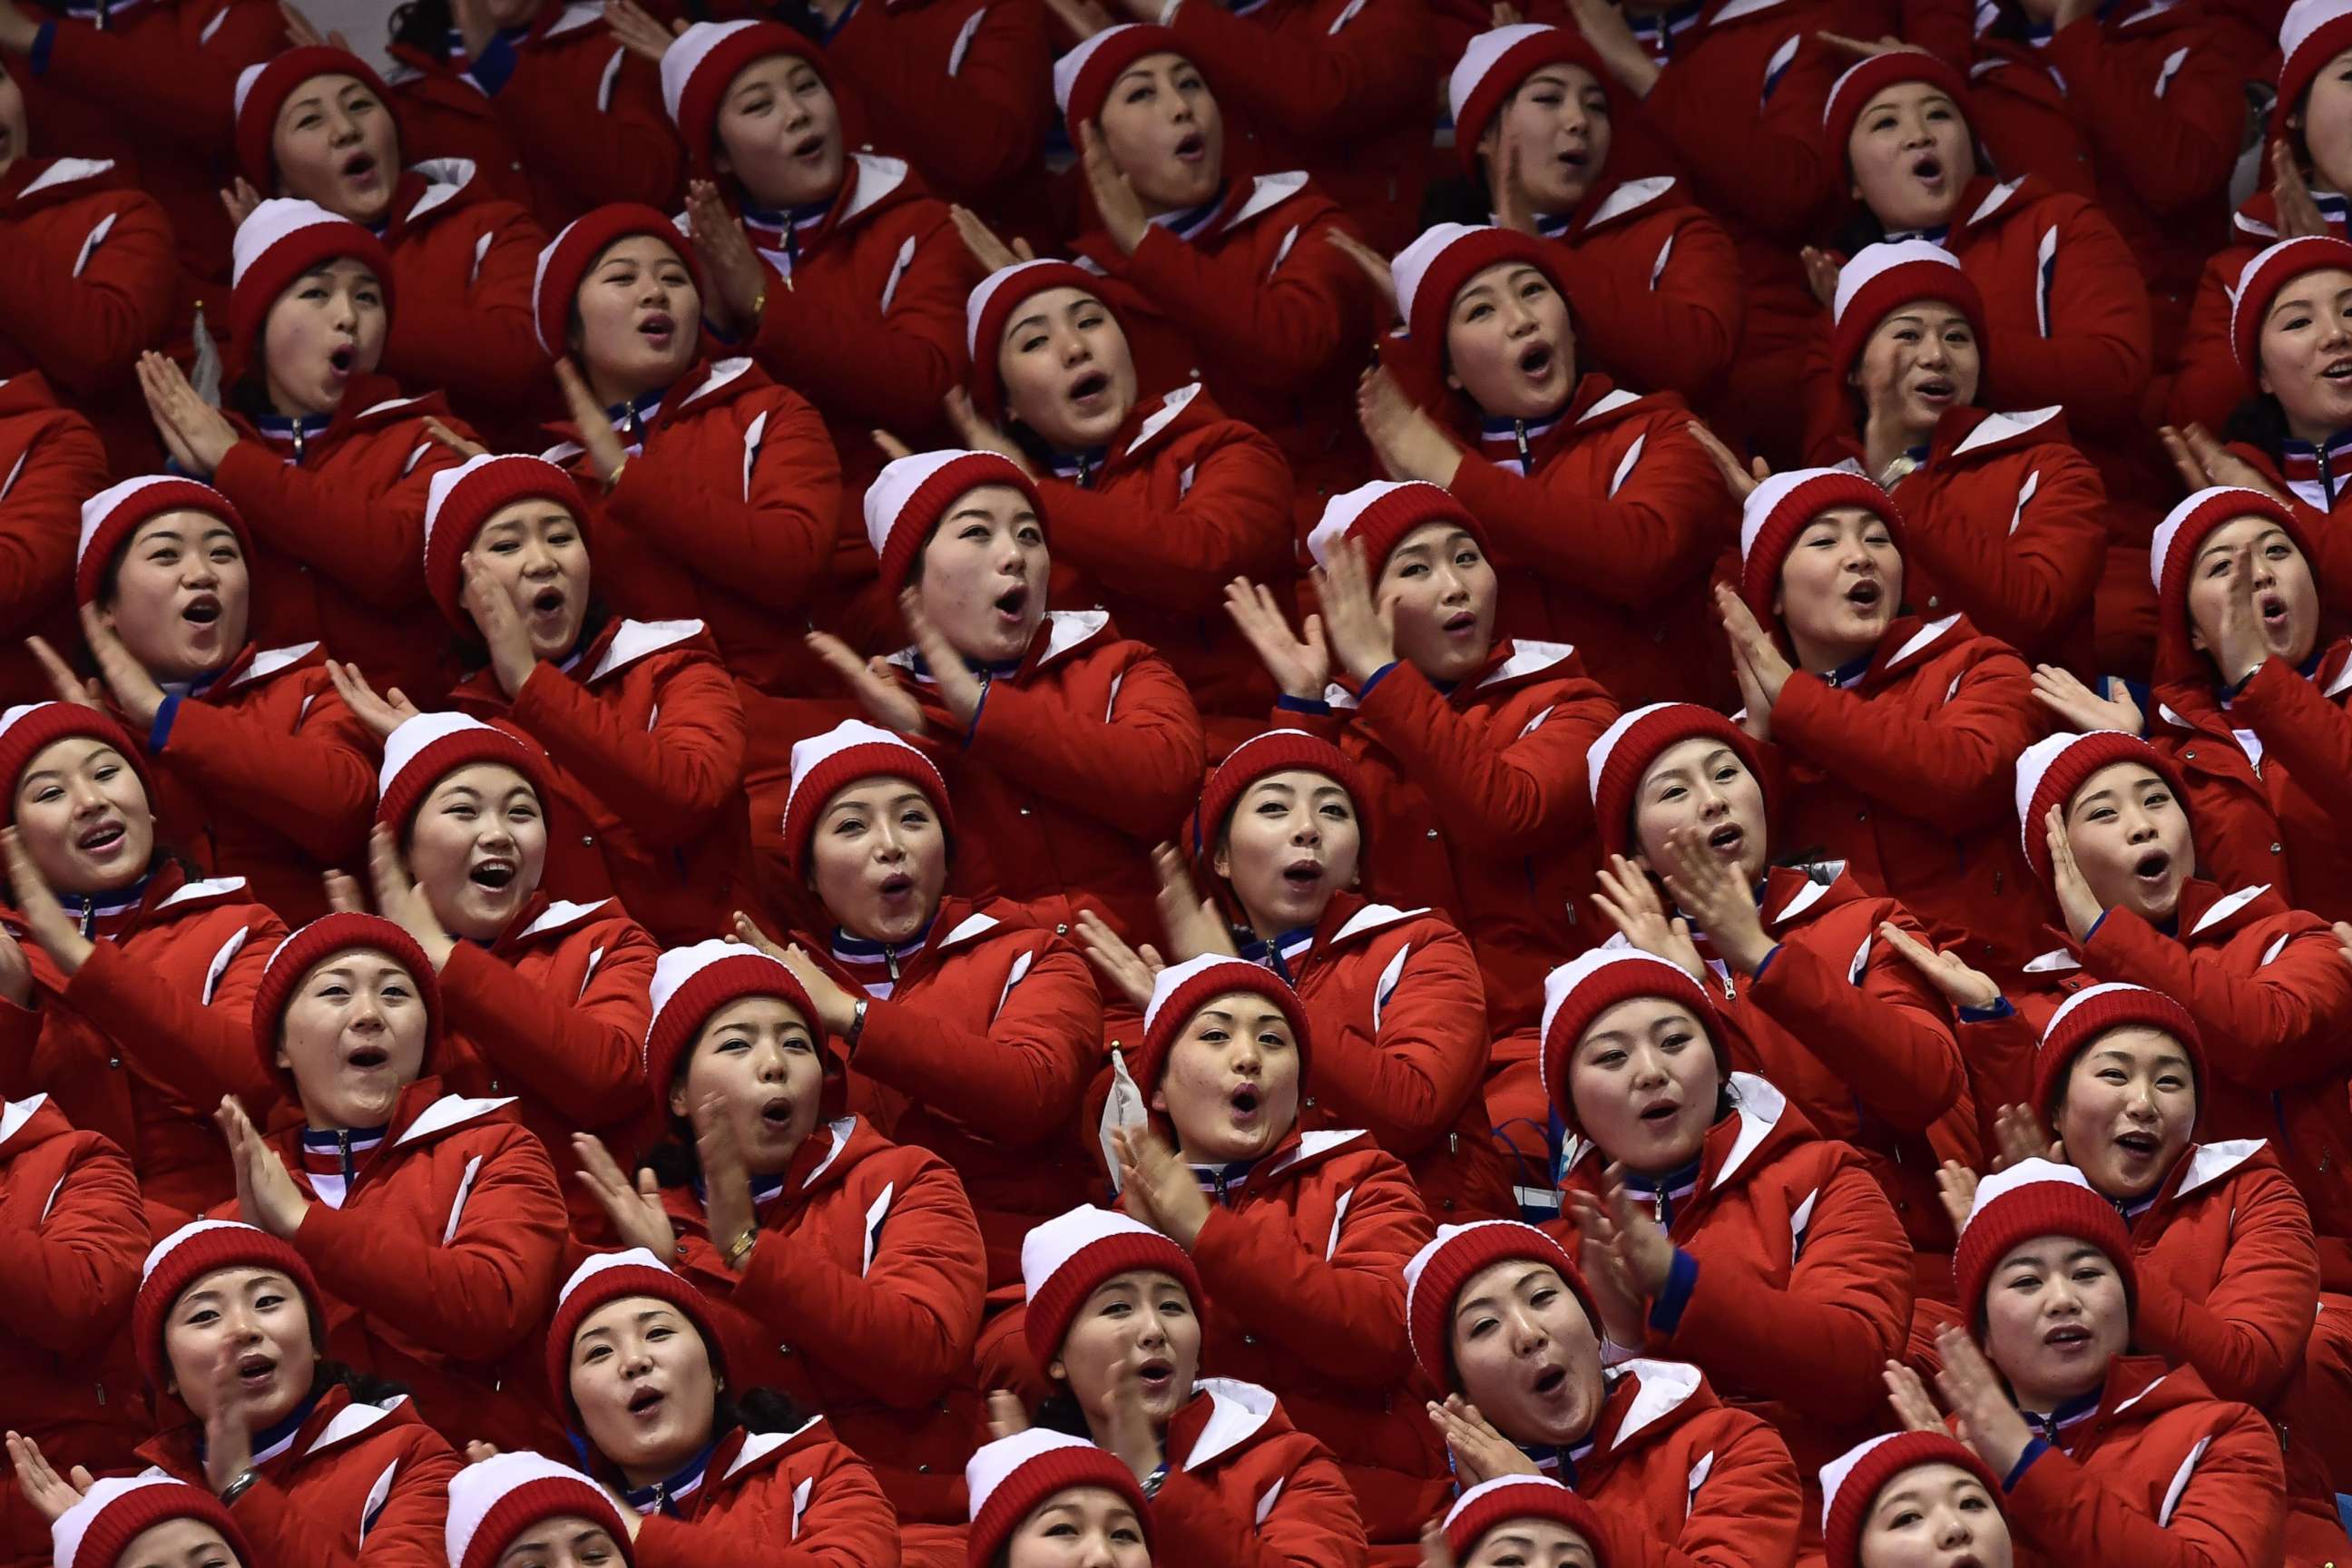 PHOTO:North Korean cheerleaders attend the pair skating free skating of the figure skating event during the Pyeongchang 2018 Winter Olympic Games at the Gangneung Ice Arena in Gangneung, Feb. 15, 2018.